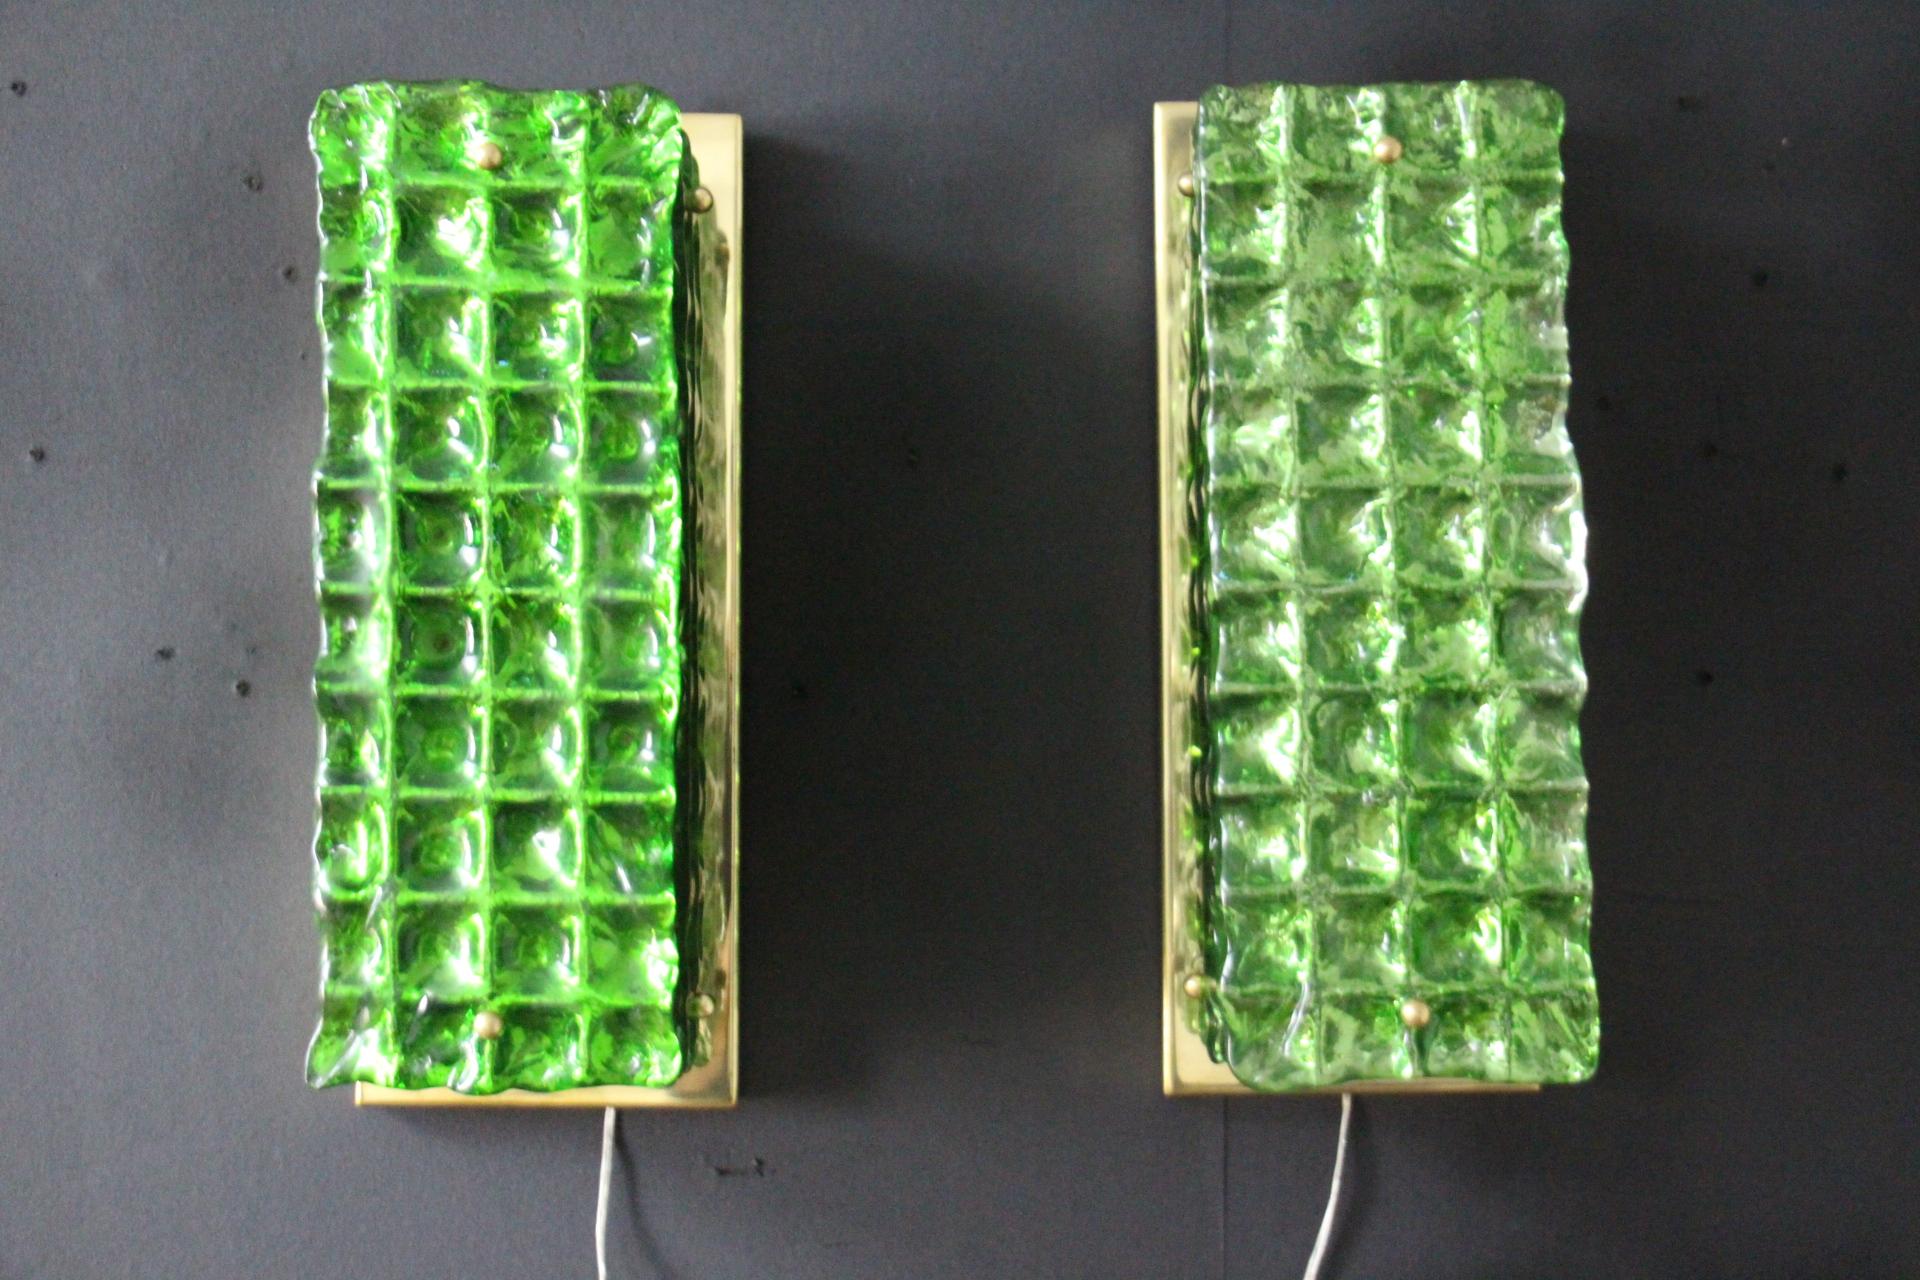 This beautiful pair of sconces has got a very deep emerald color.
All made in textured Murano glass, it features a kind of checkers pattern that is very unique. Pieces of glass have been individually made by hand by a team of very skilled artisans